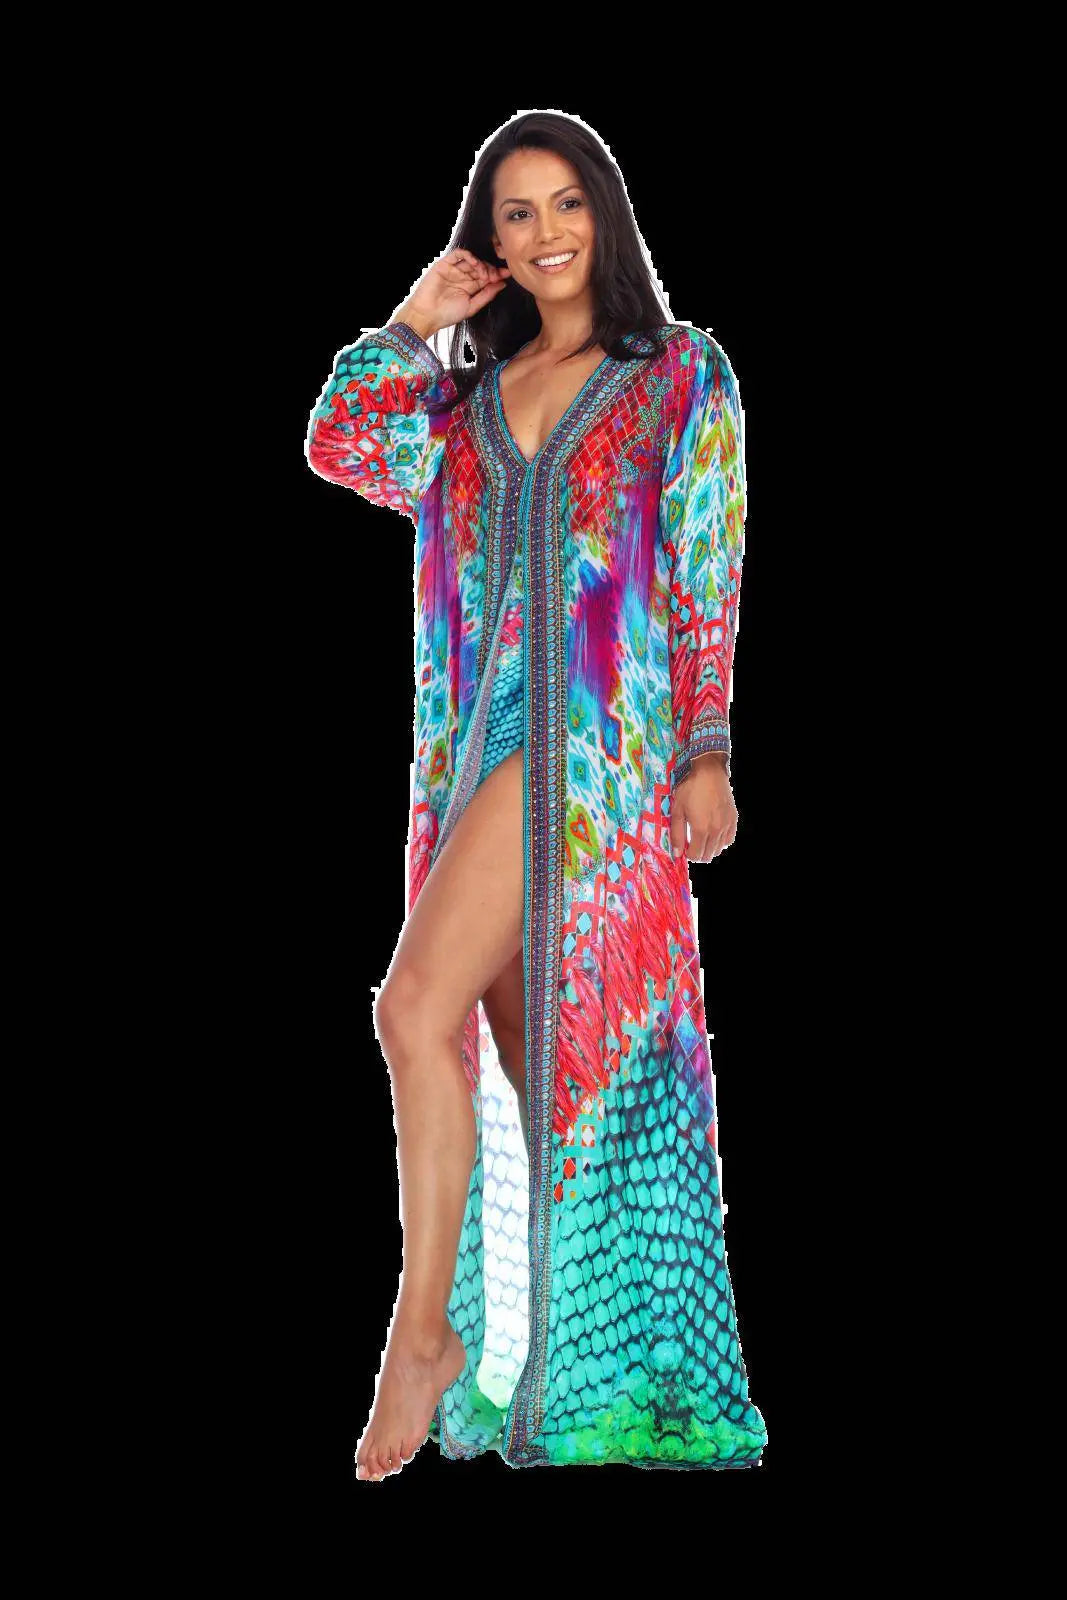 Wholesale High End Swimwear Cover Up Kimonos For Women In Vibrant Prints  Made From Viscose Silk | La Moda Clothing